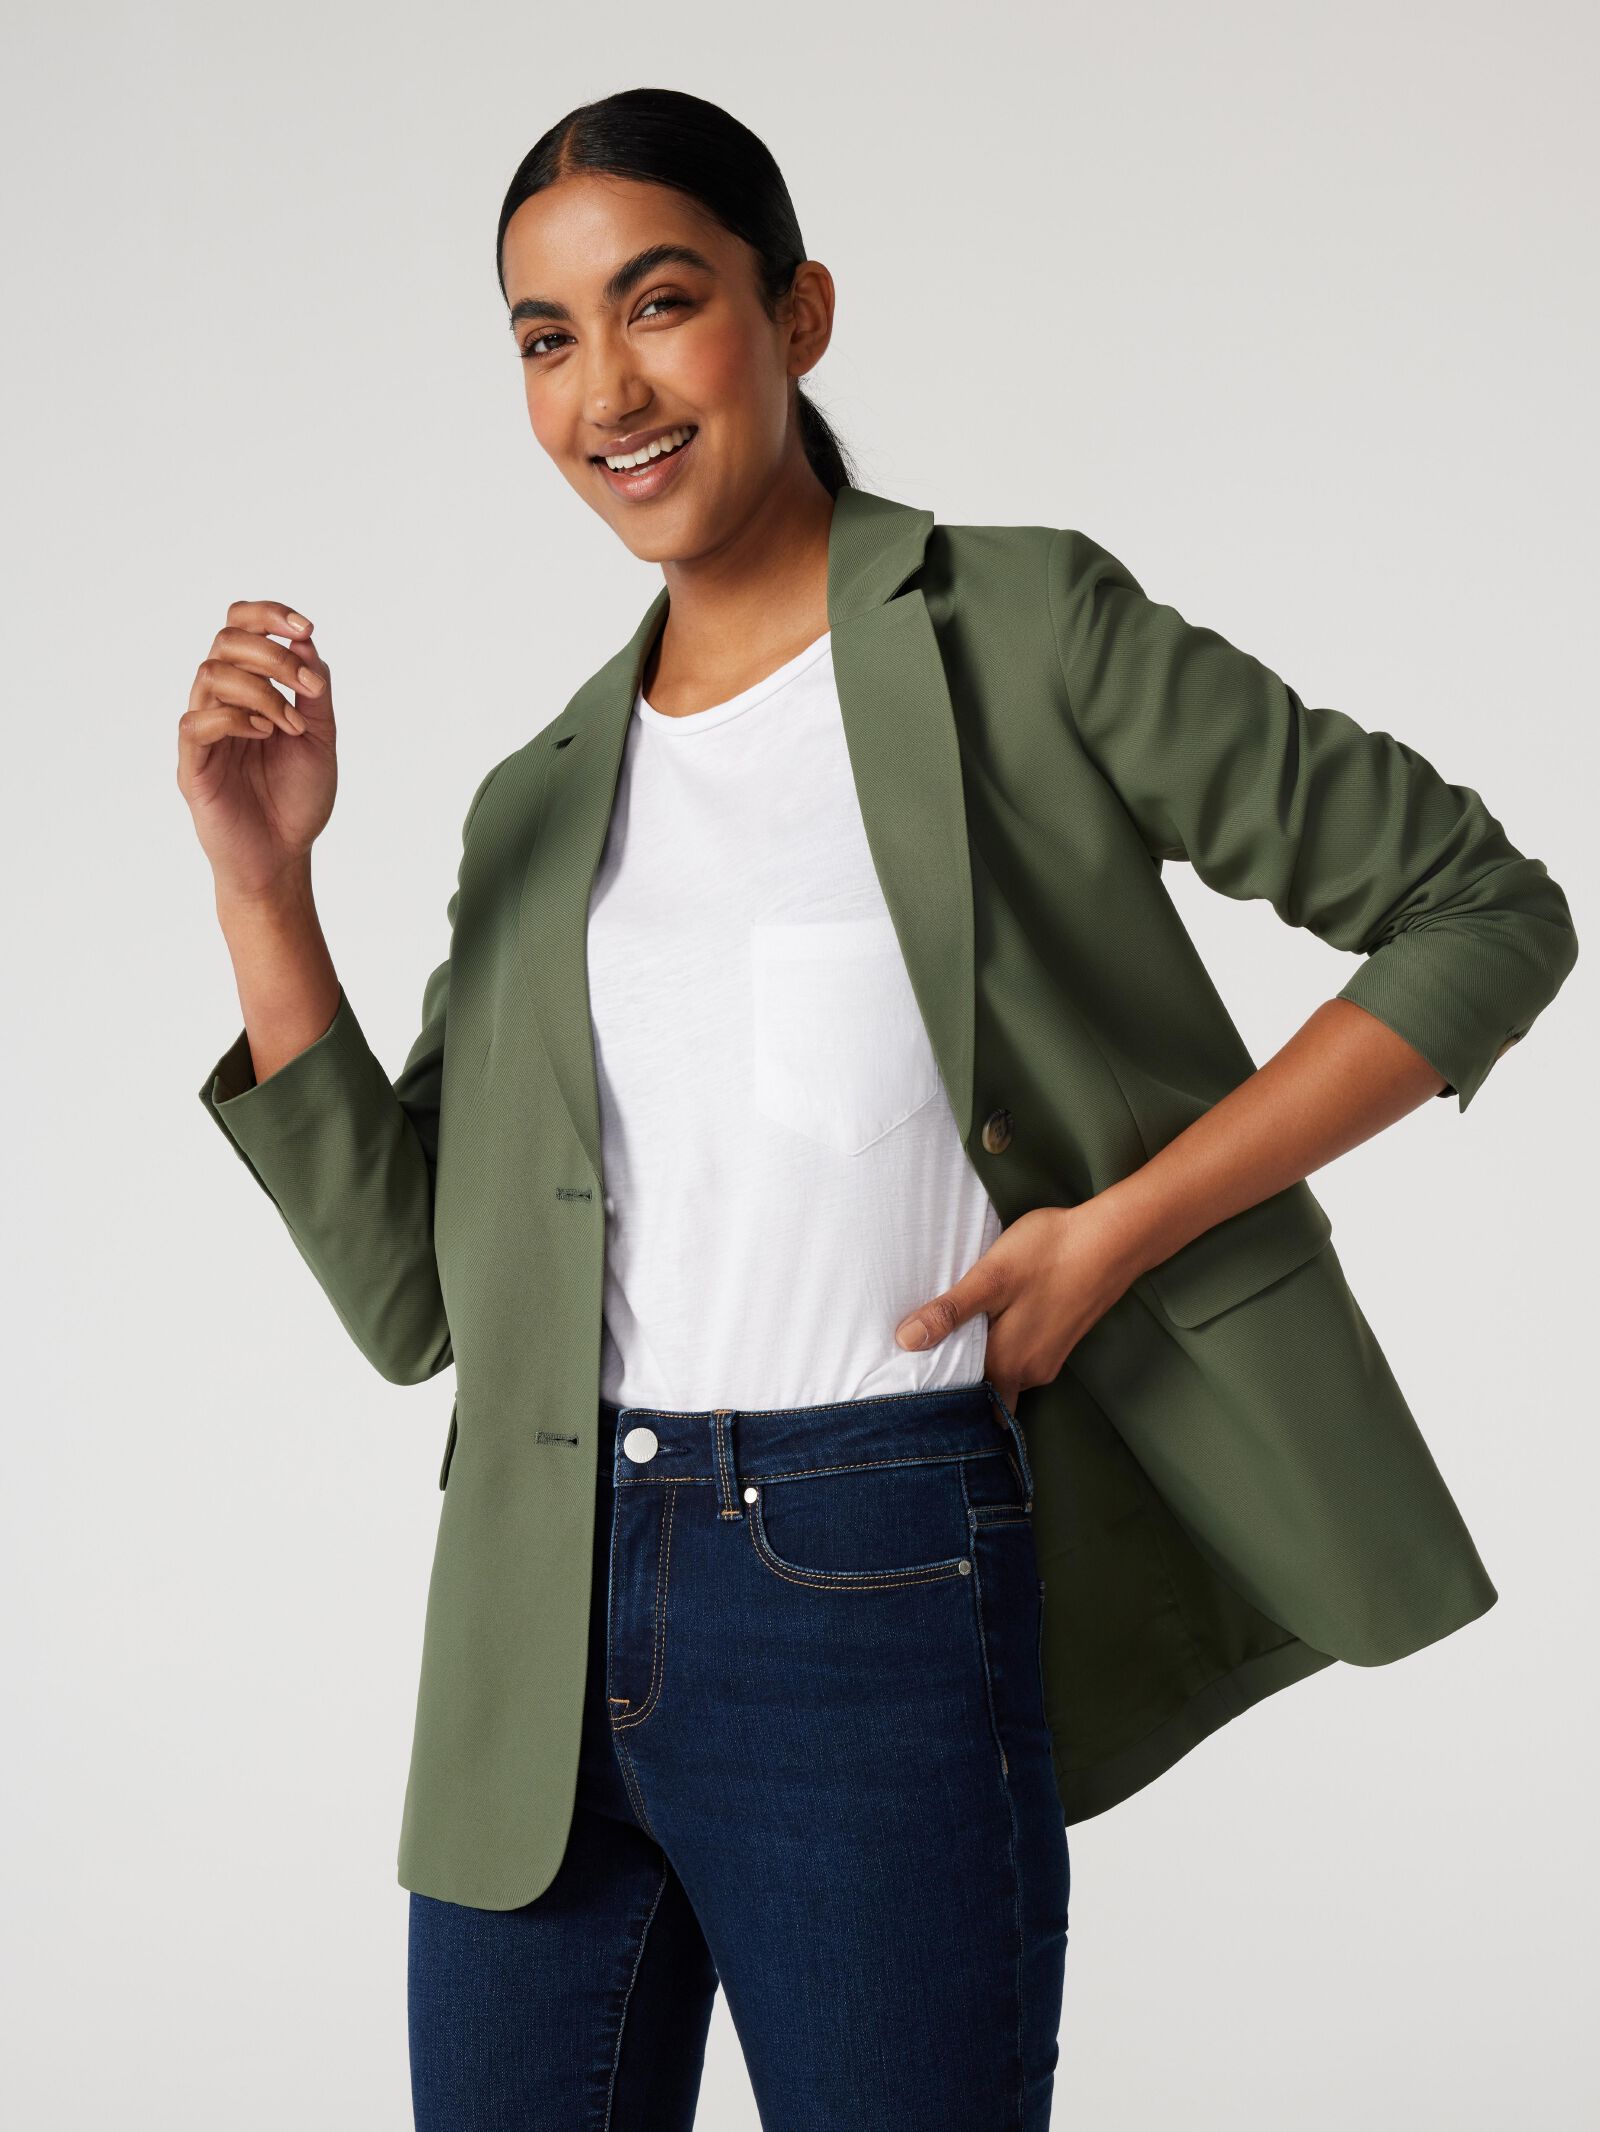 Women's Clothing + Accessories Sale - EOFY Sale at Sportsgirl